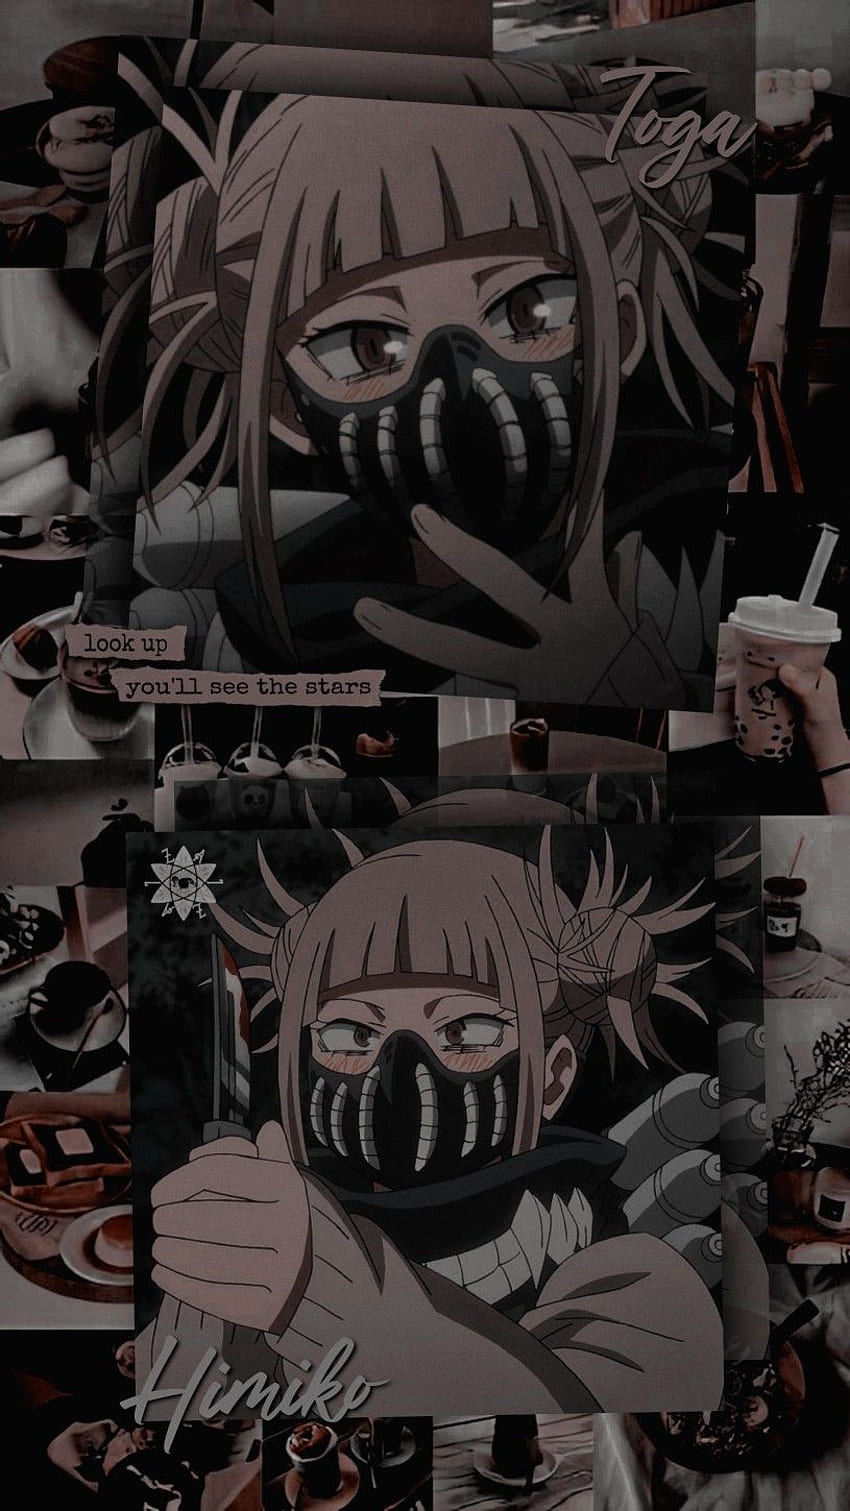 Details 62+ aesthetic toga himiko wallpaper best - in.cdgdbentre